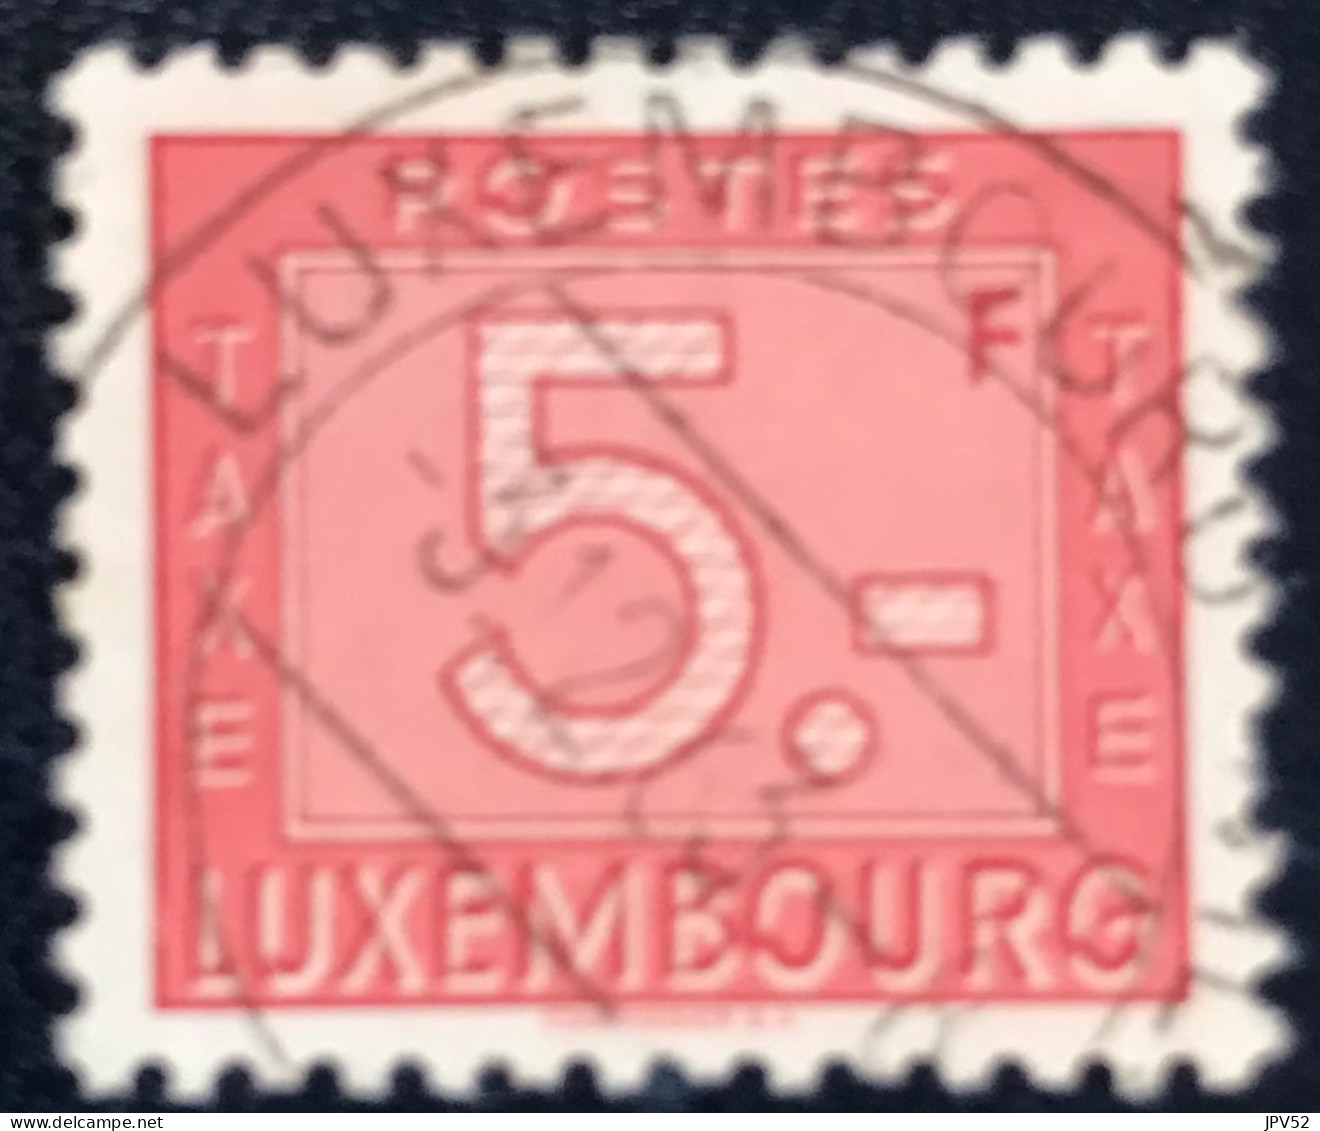 Luxembourg - Luxemburg - C18/33 - 1946 - (°)used - Michel 34 - Strafport - Cijfer - LUXEMBOURG - Taxes